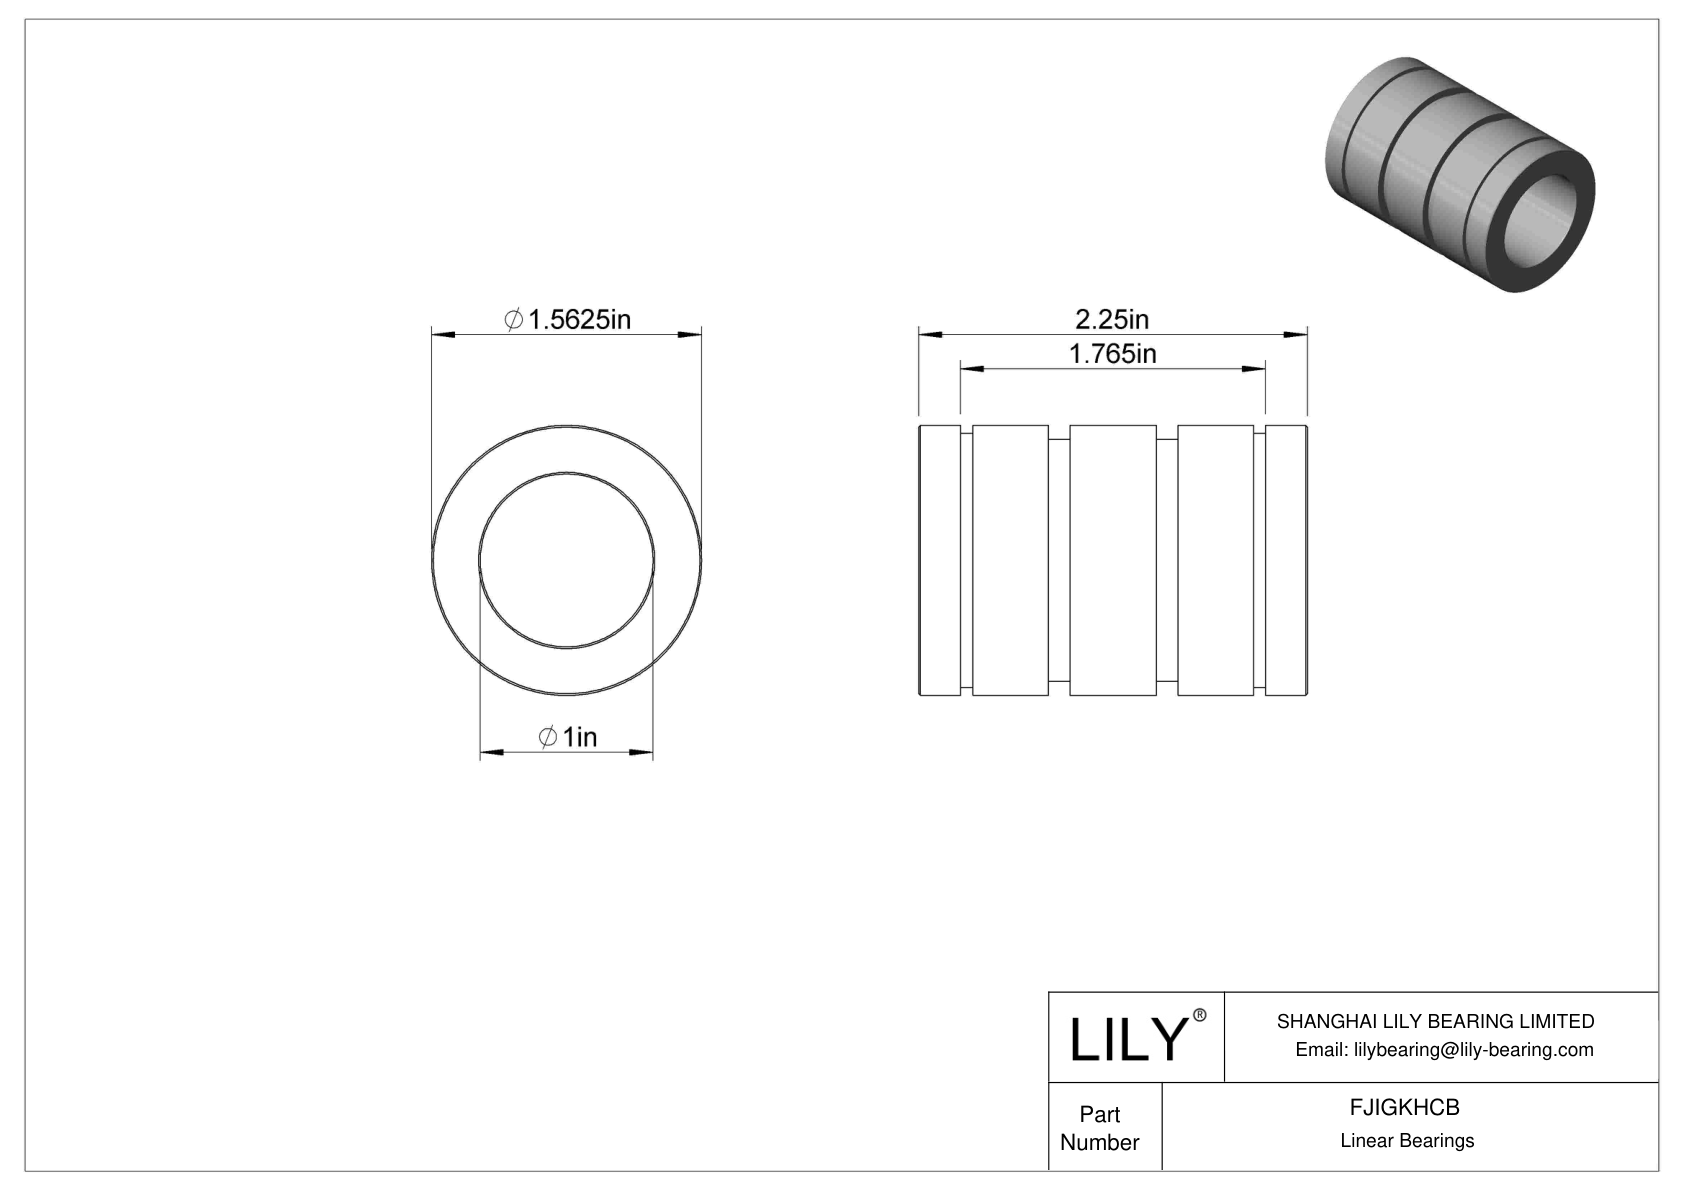 FJIGKHCB Common Linear Sleeve Bearings cad drawing